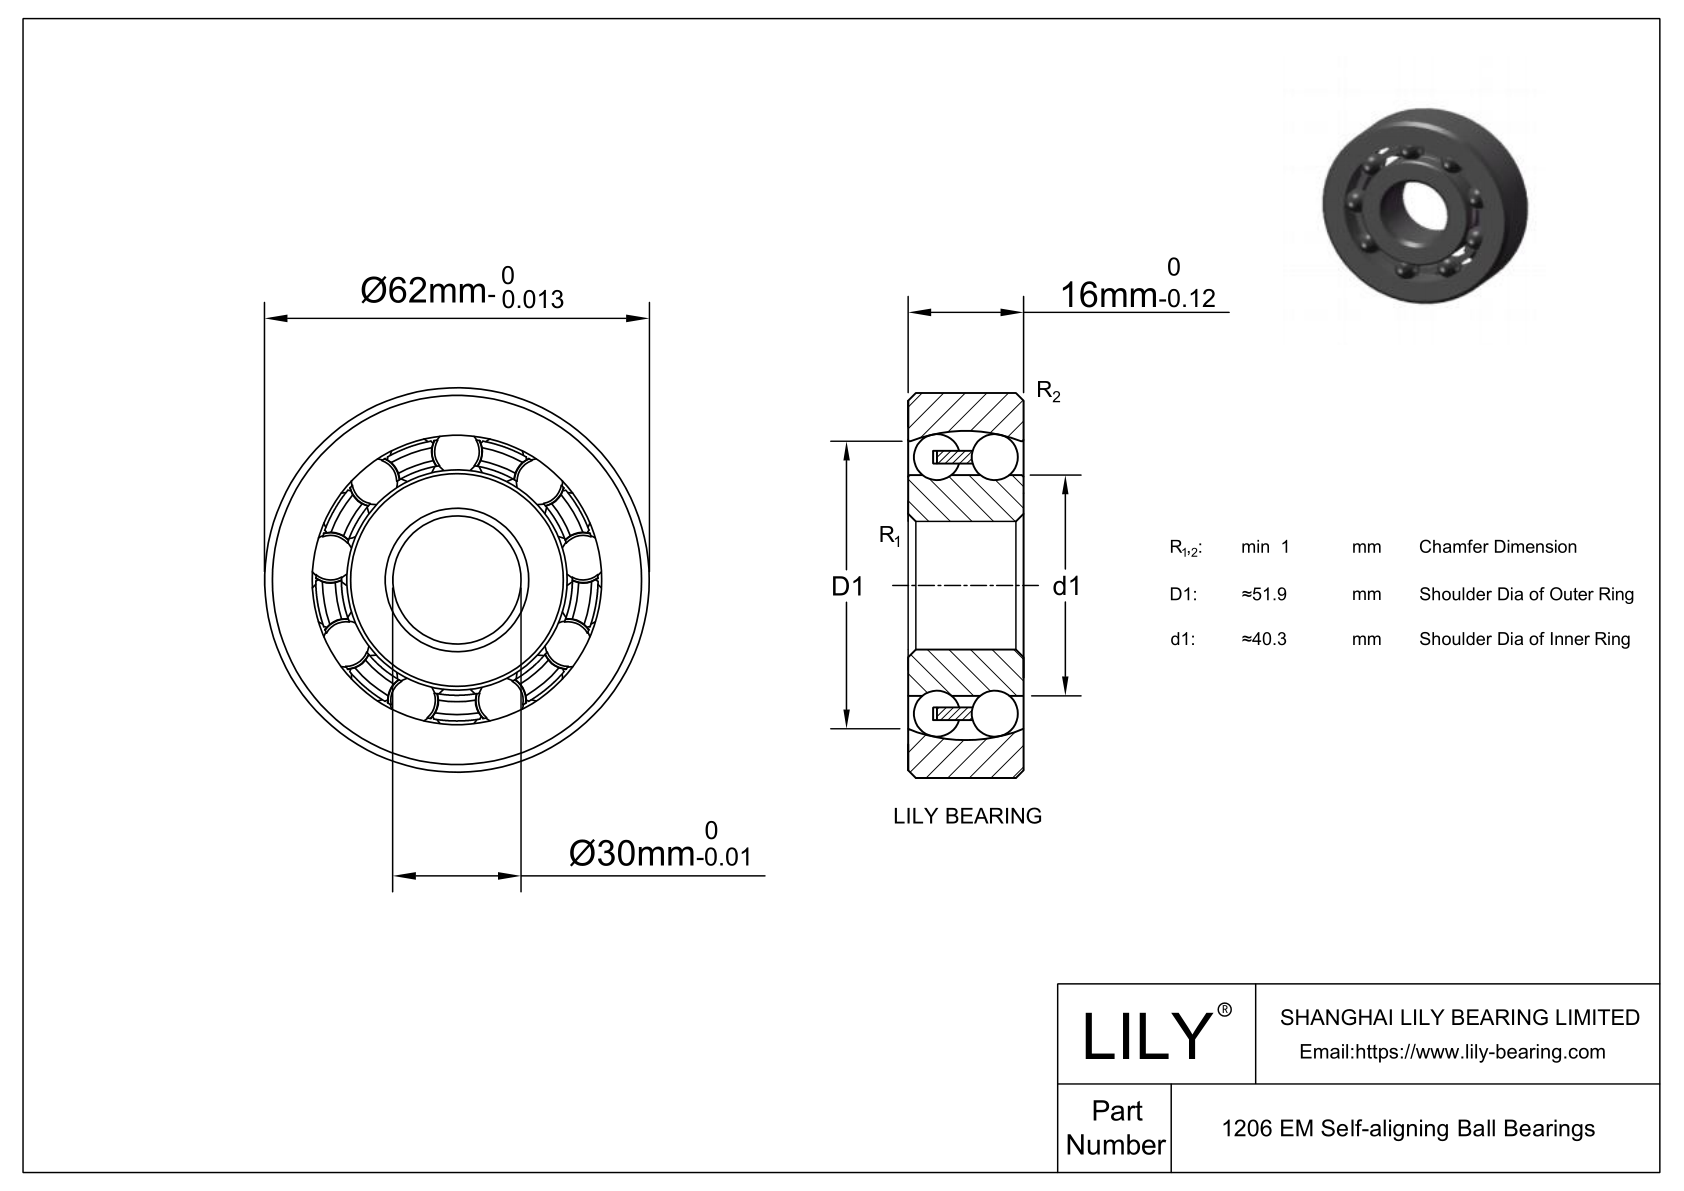 S1206 EM Stainless Steel Self Aligning Ball Bearings cad drawing